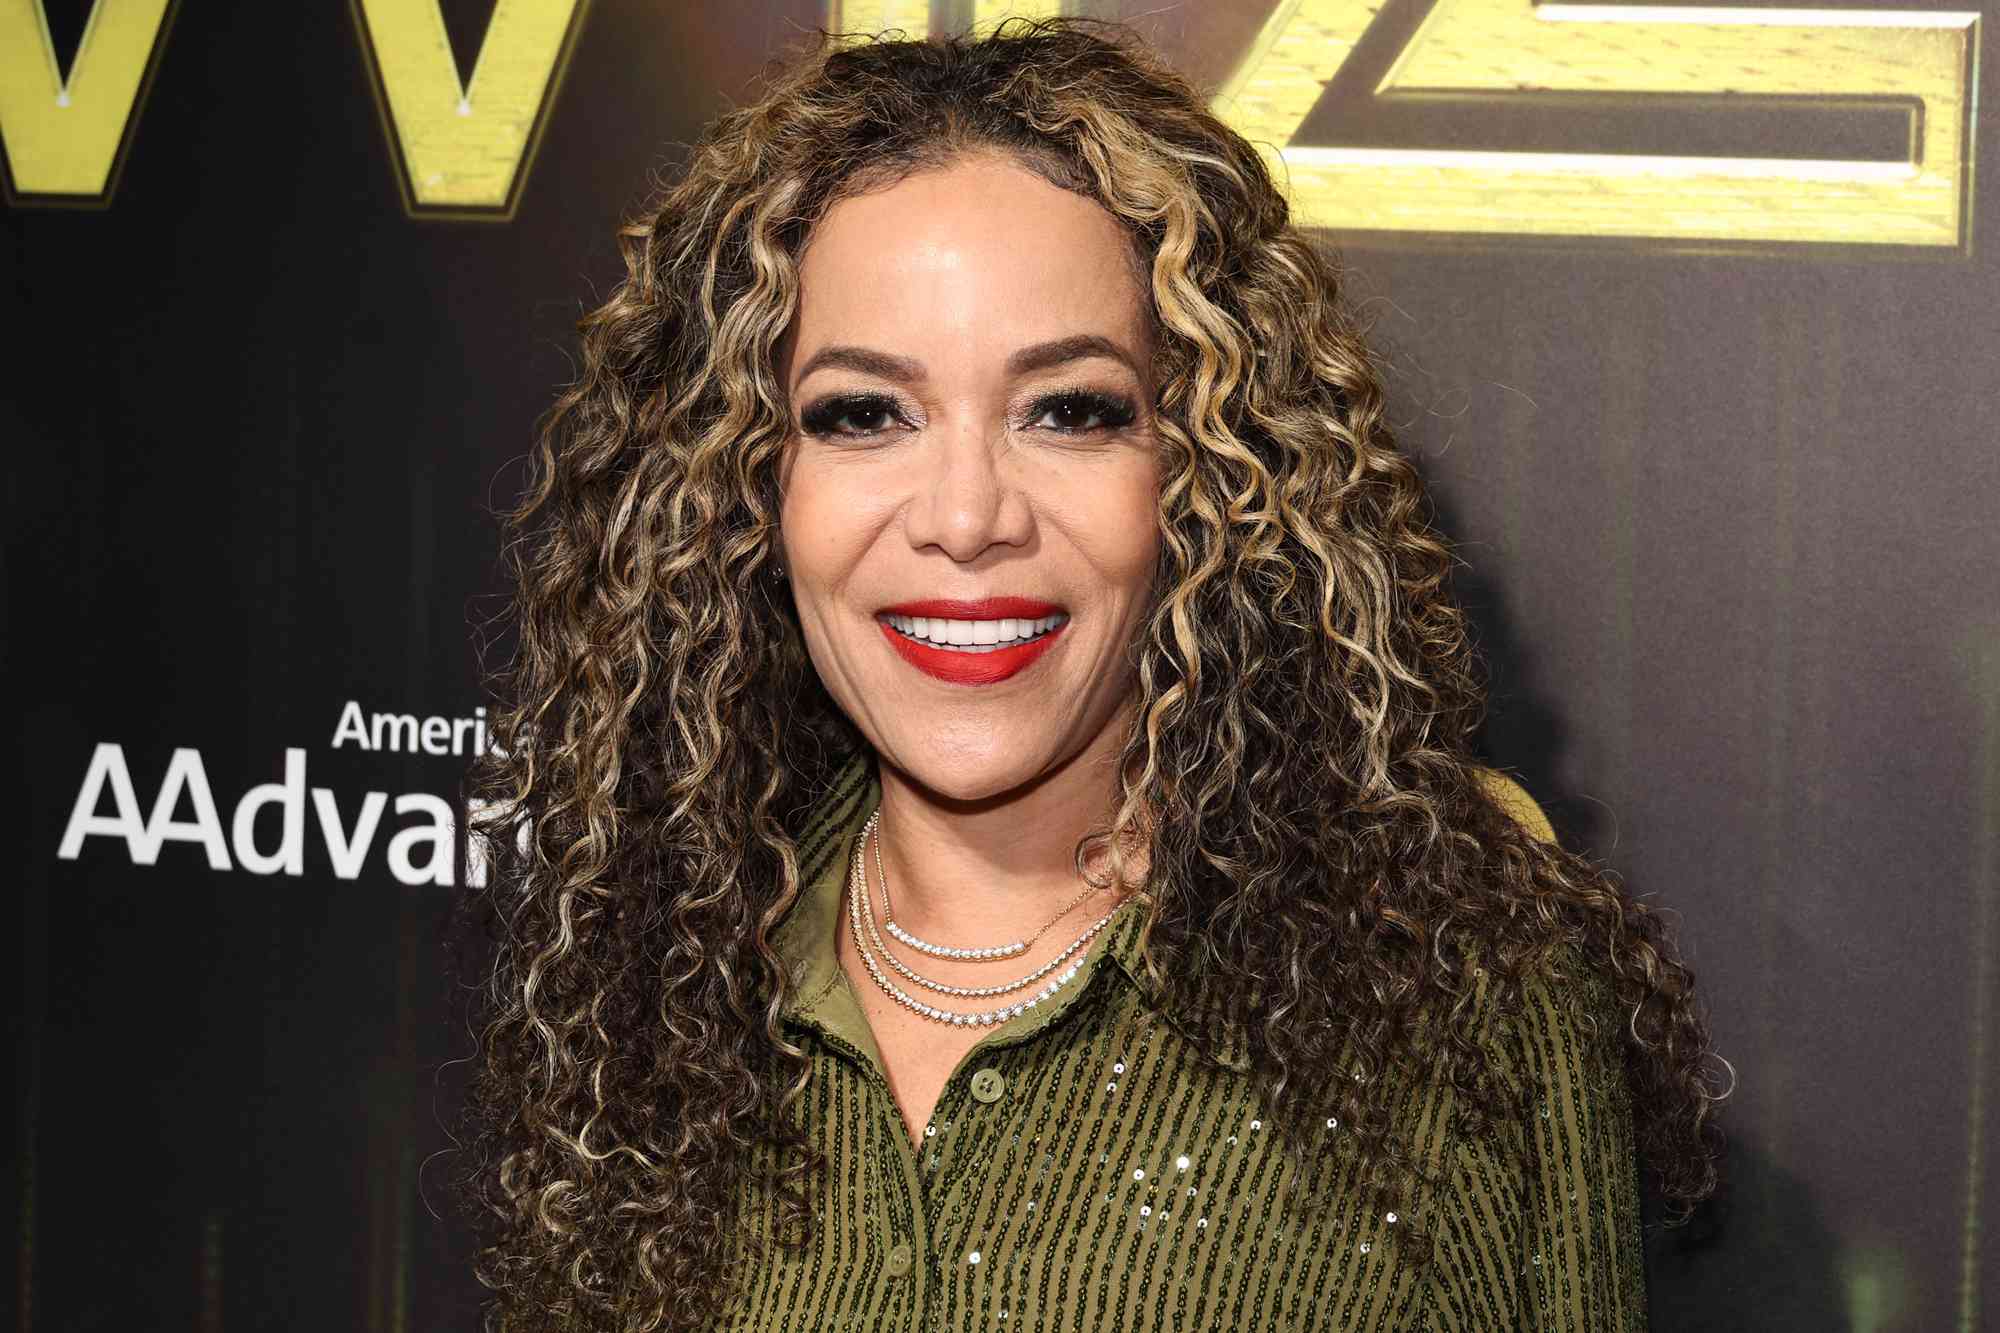 Sunny Hostin on Embracing Her Natural Curly Hair on “The View”: ‘I Got Such a Positive Response’